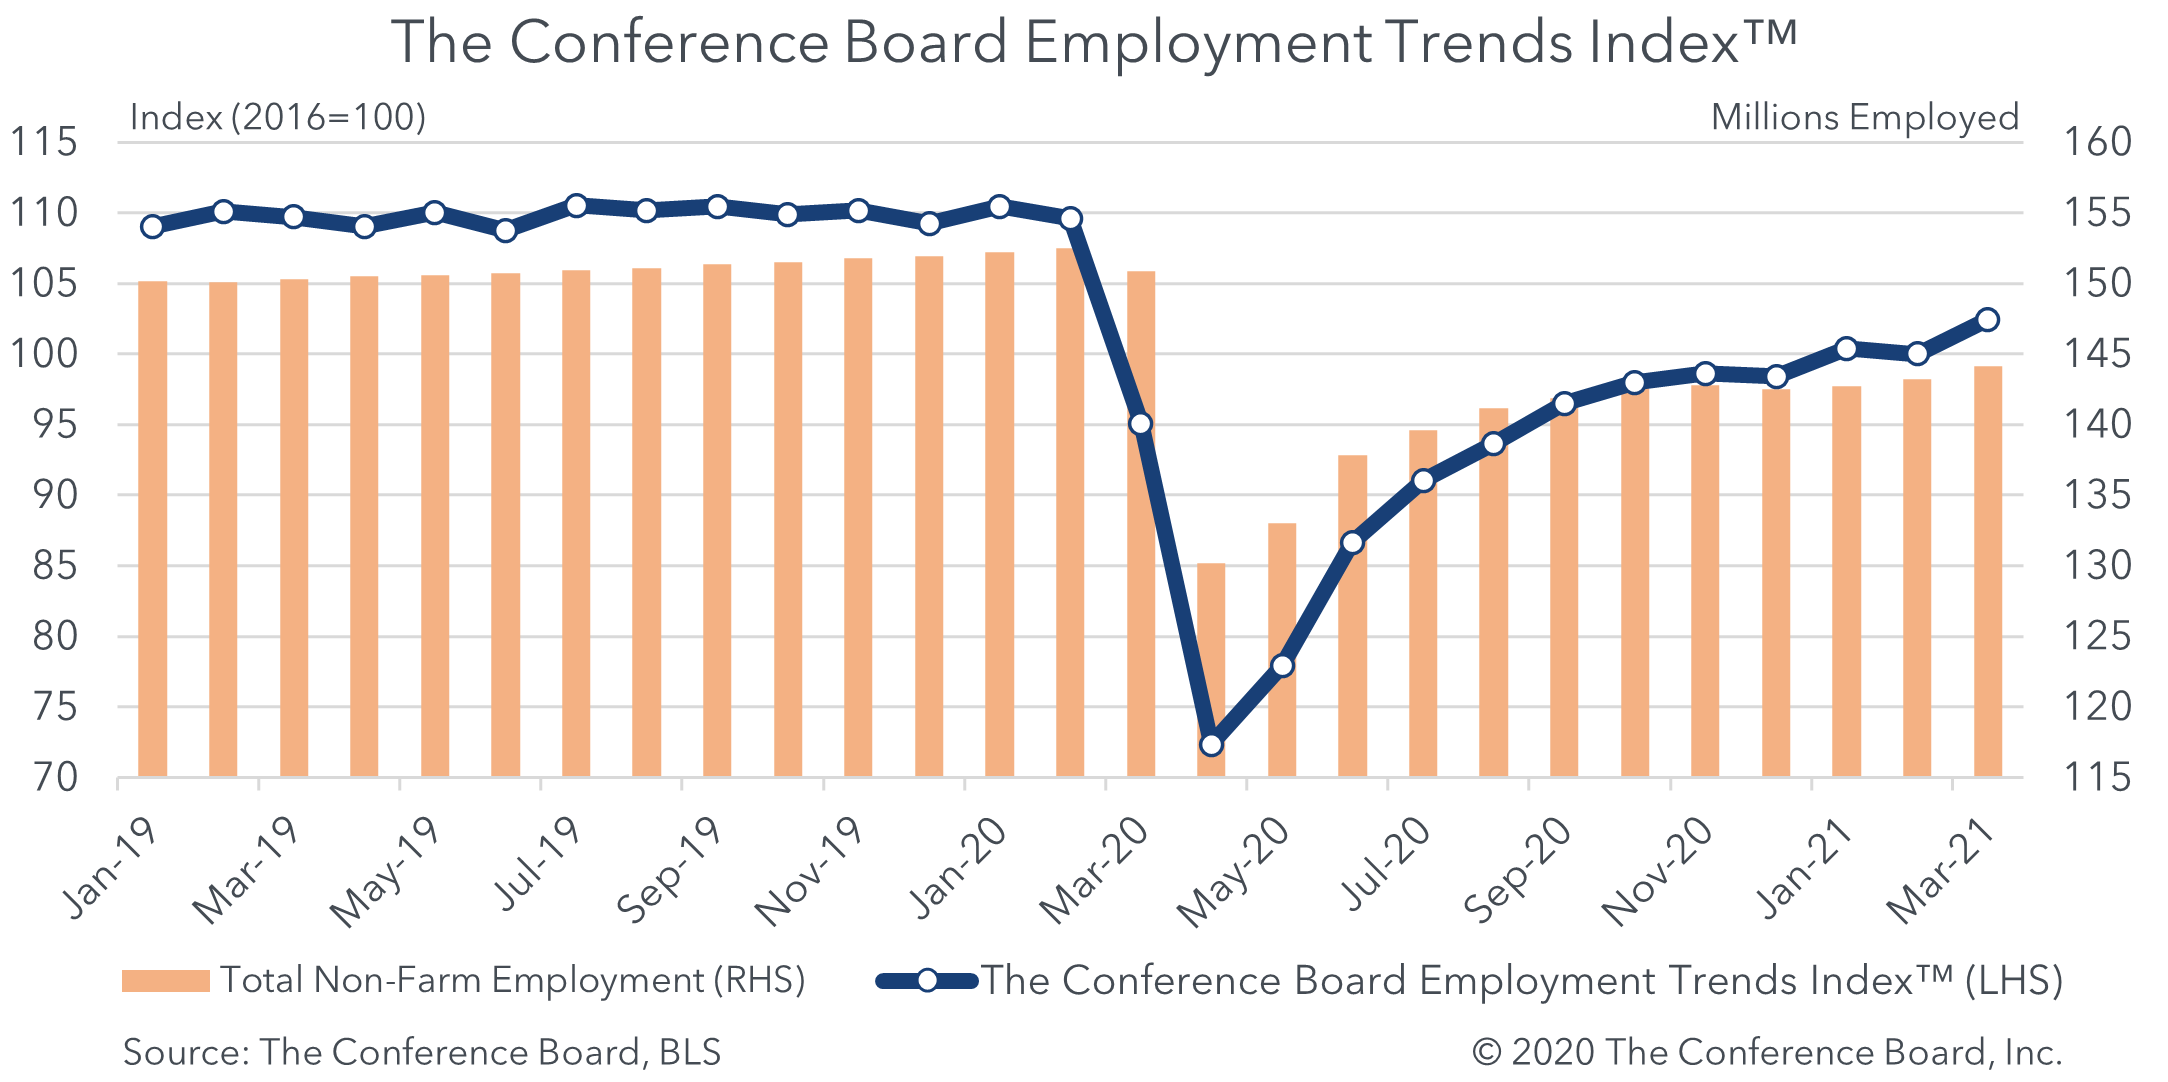 The Conference Board ETI<sup>™</sup> indicates strong job growth ahead